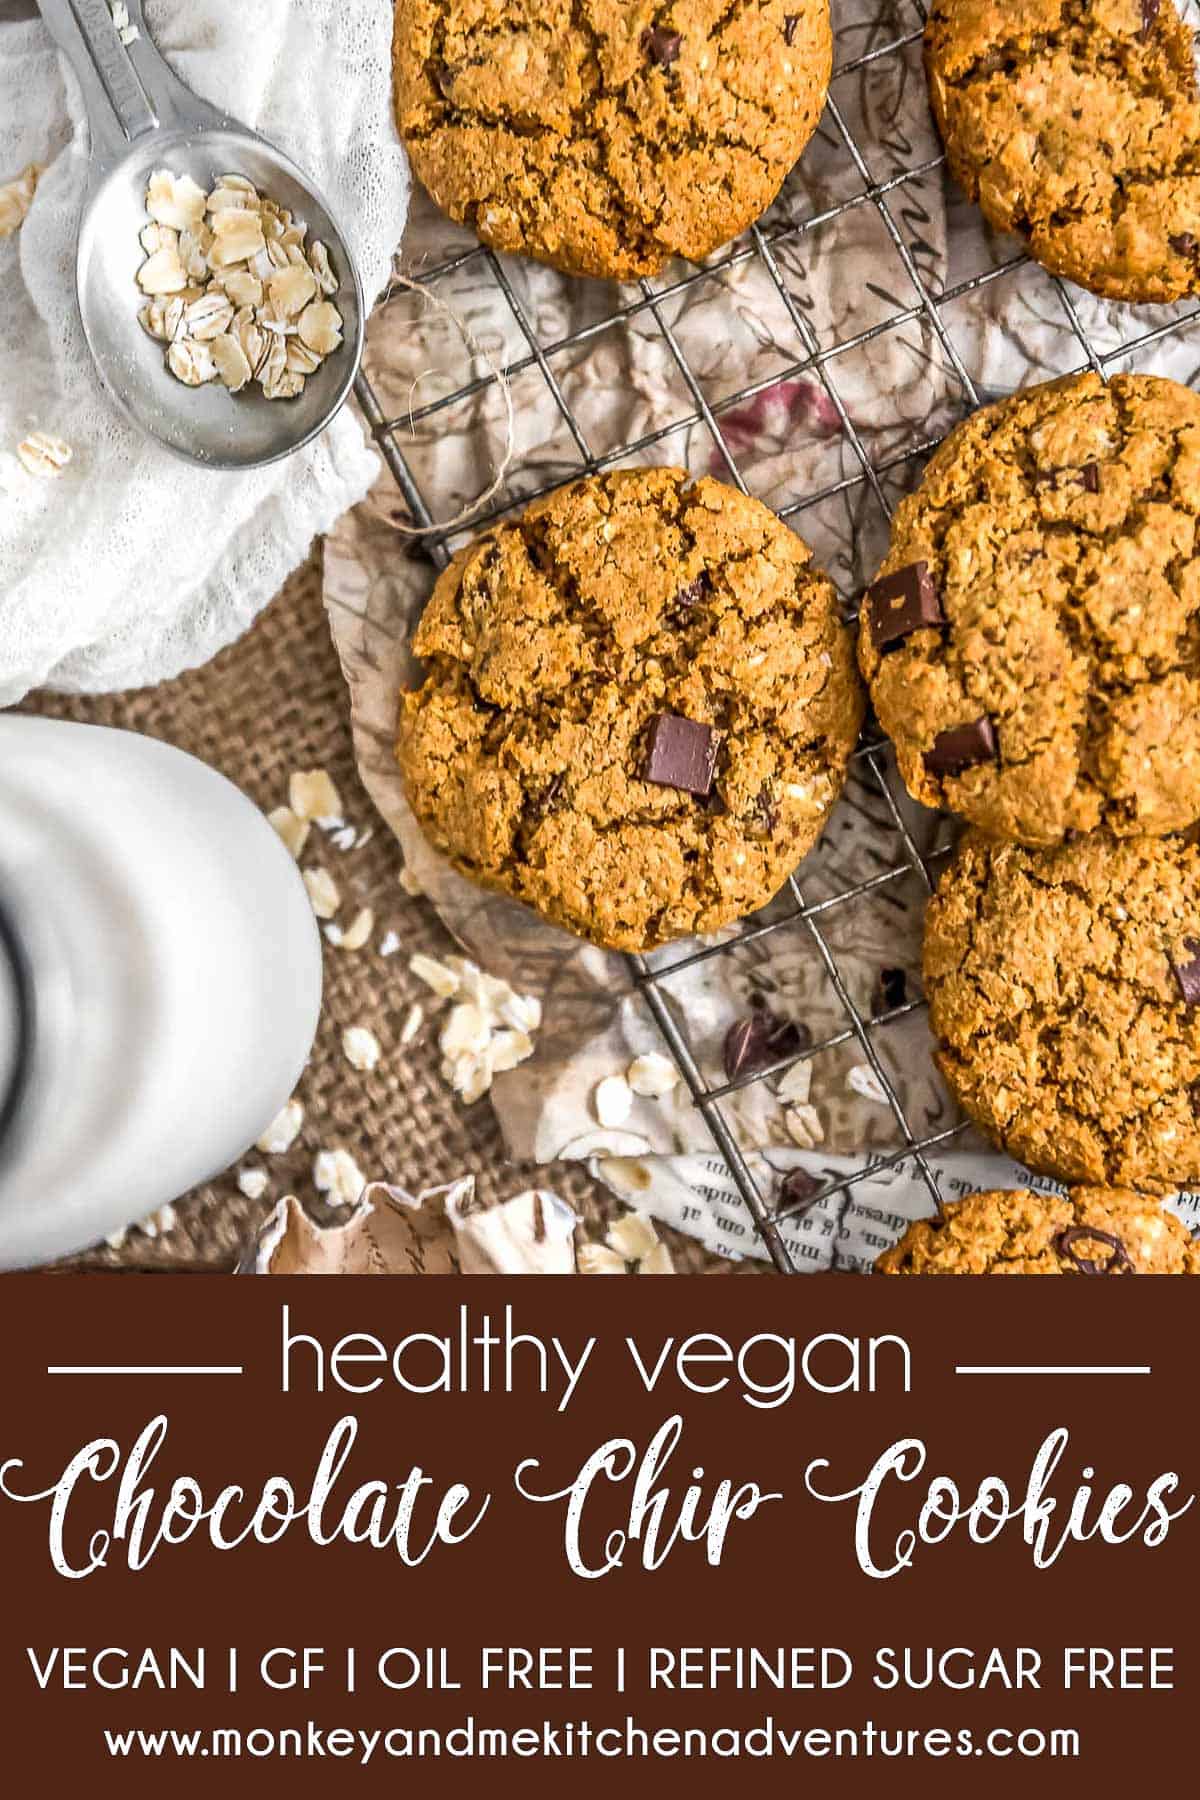 Healthy Vegan Chocolate Chip Cookies with text description